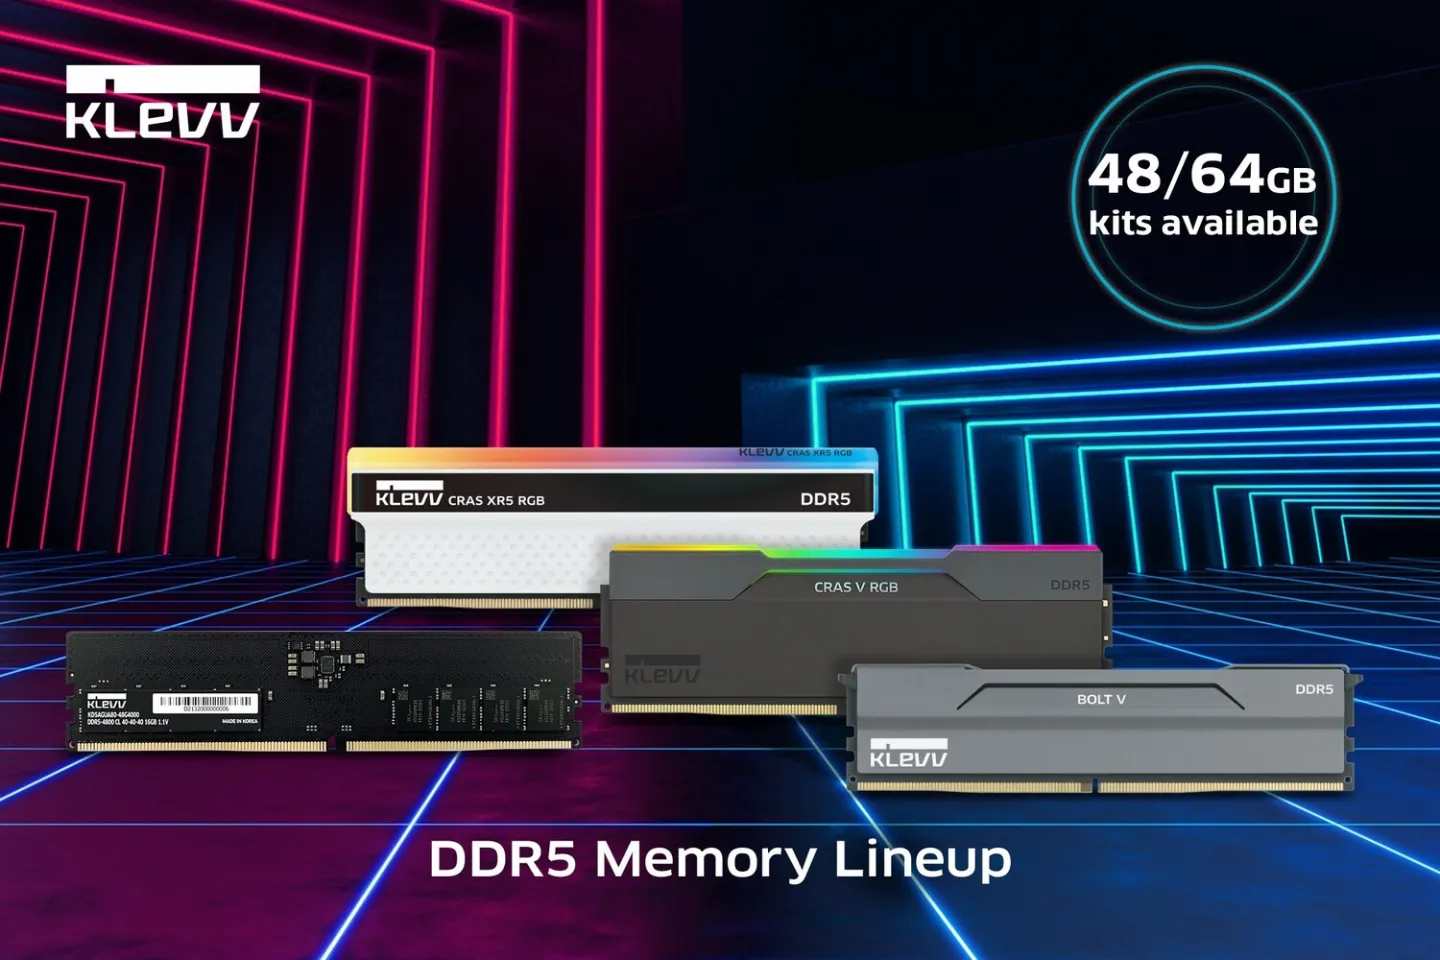 Klevv Launches 48 and 64 GB DDR5 RAM Kits